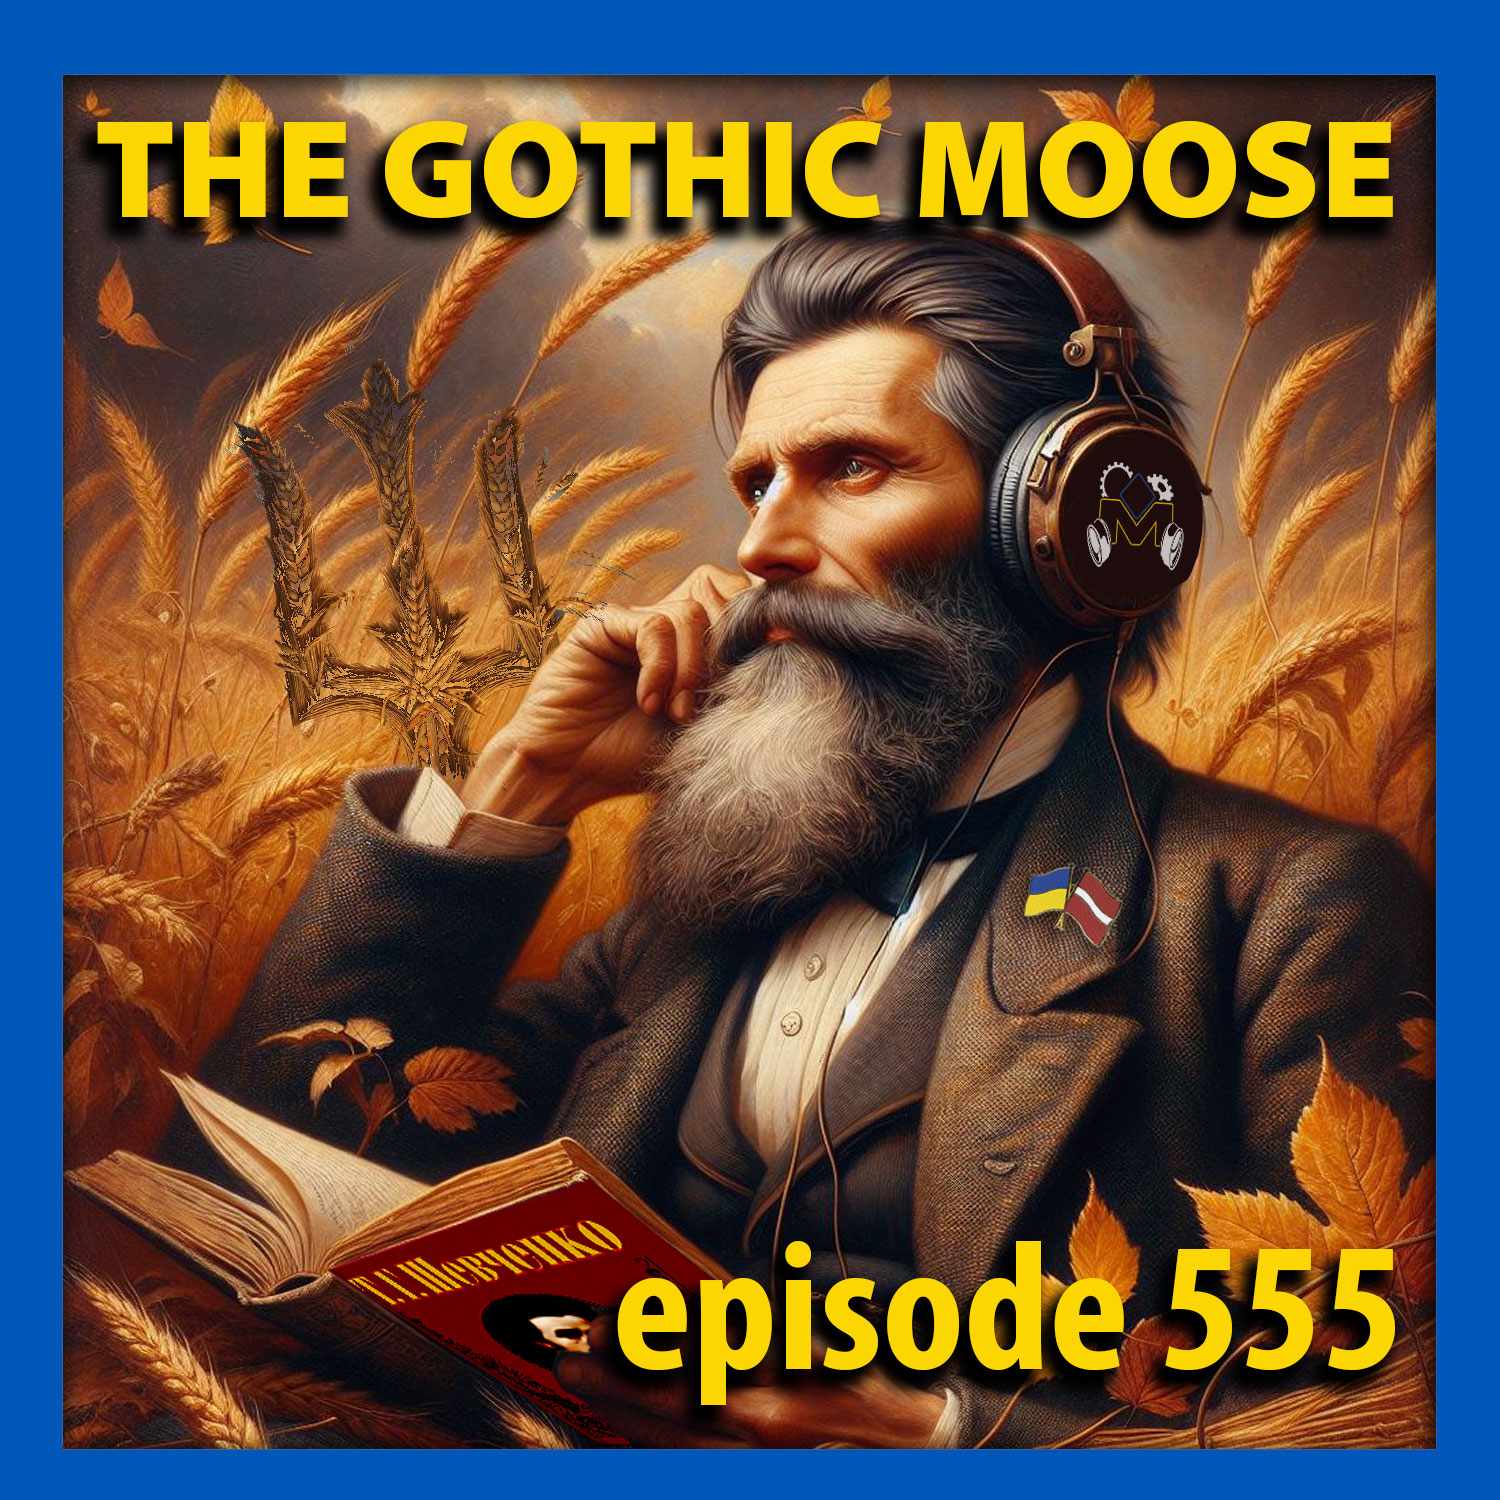 The Gothic Moose – Episode 555 – All Ukrainian bands or bands supporting Ukraine